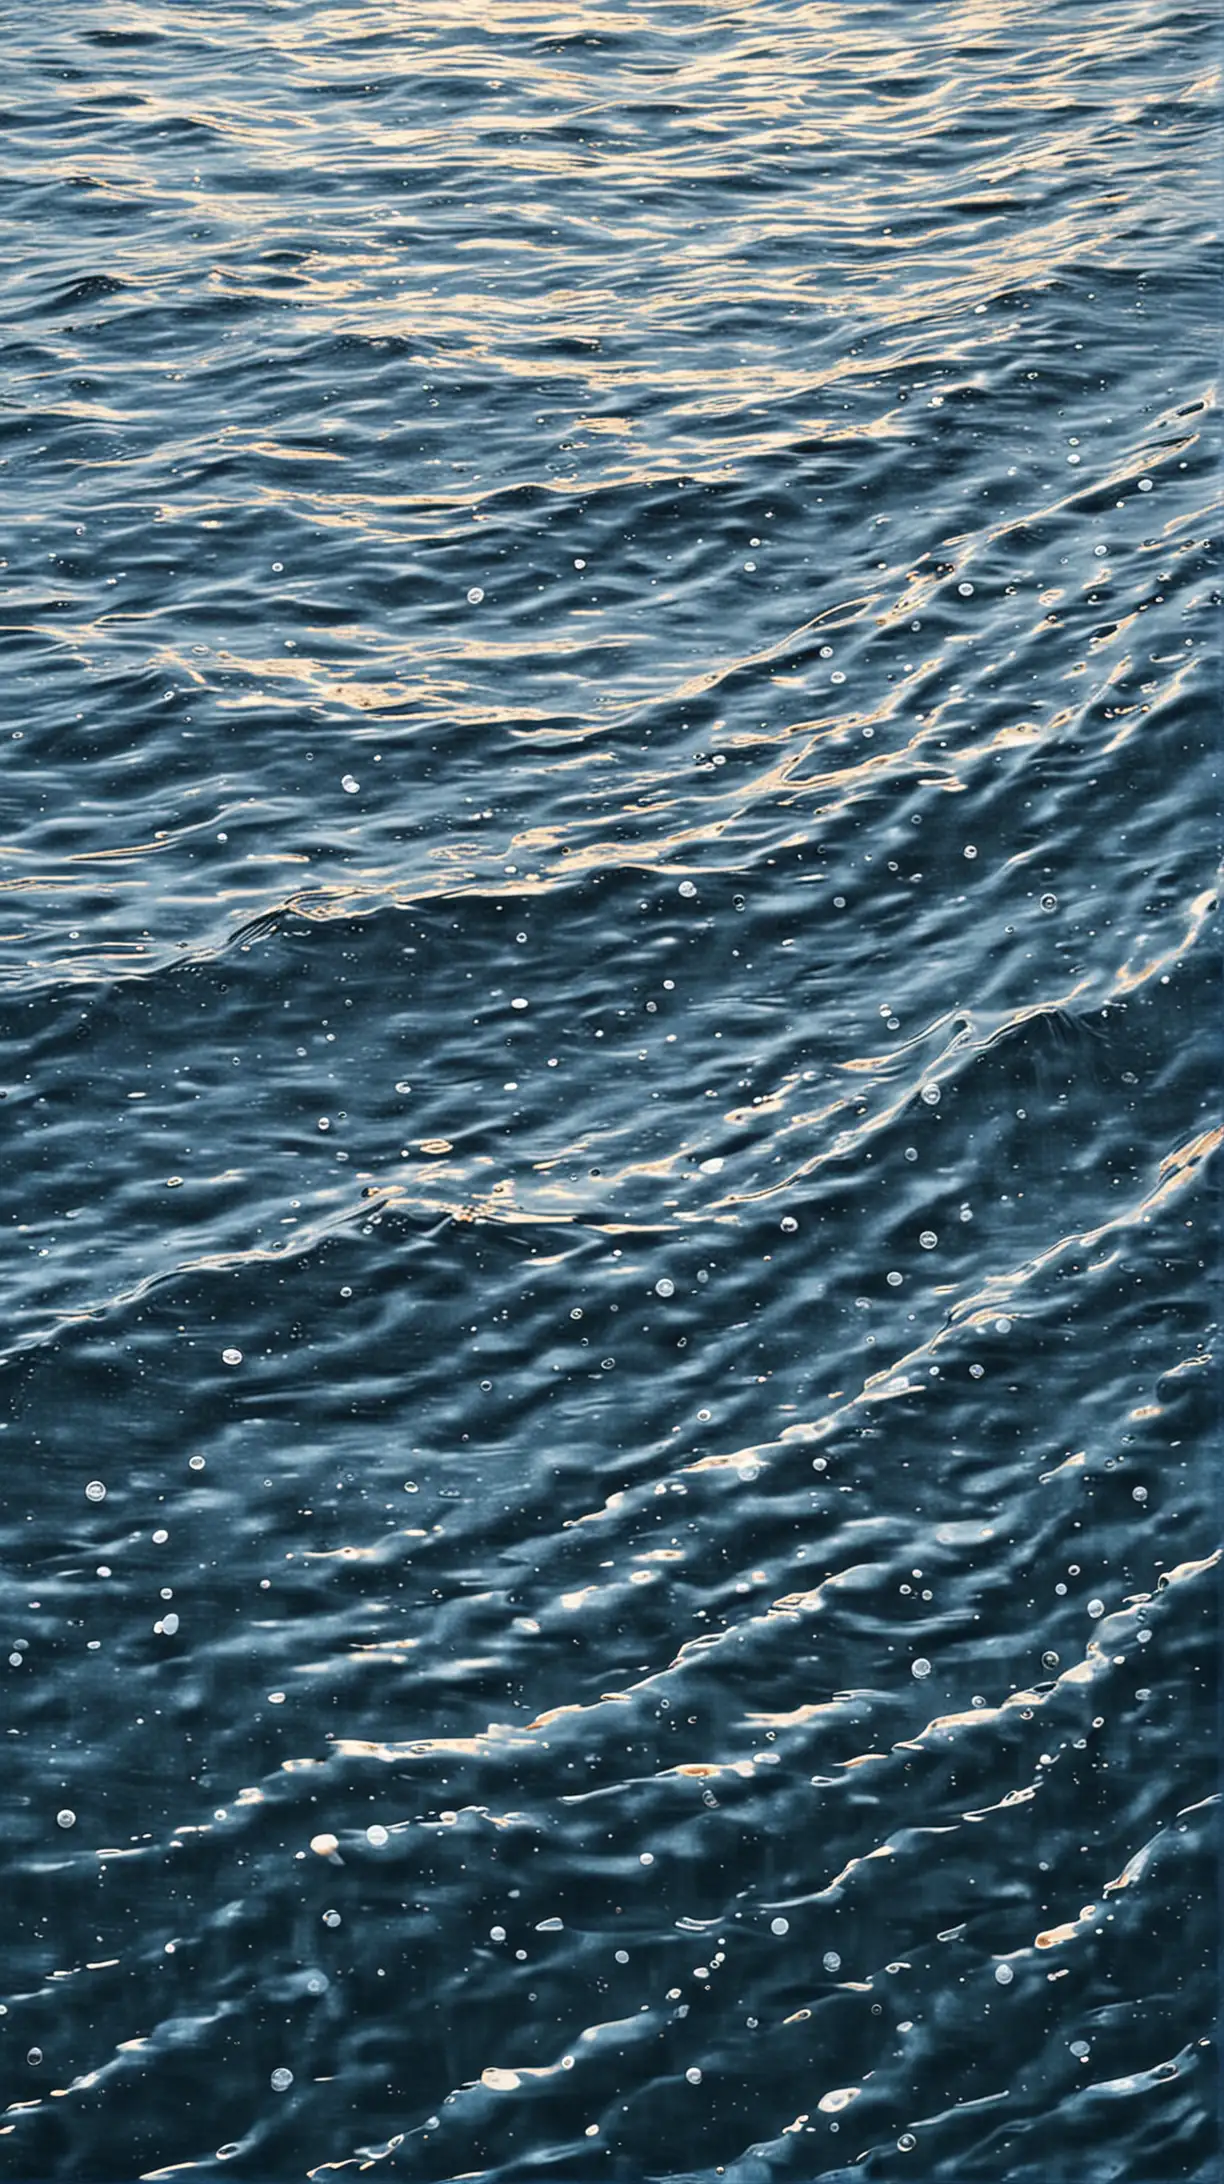 an illustration of a pattern resembling water with ripples or waves. The color palette consists of various shades of blue, creating a calming and aquatic effect. White dots are scattered throughout the image, which could be interpreted as light reflections on the water’s surface. There are no math or homework problems present in this image to transcribe. This image is interesting due to its simplicity and the soothing effect it can have on the viewer, potentially evoking feelings associated with looking at gentle water movements.